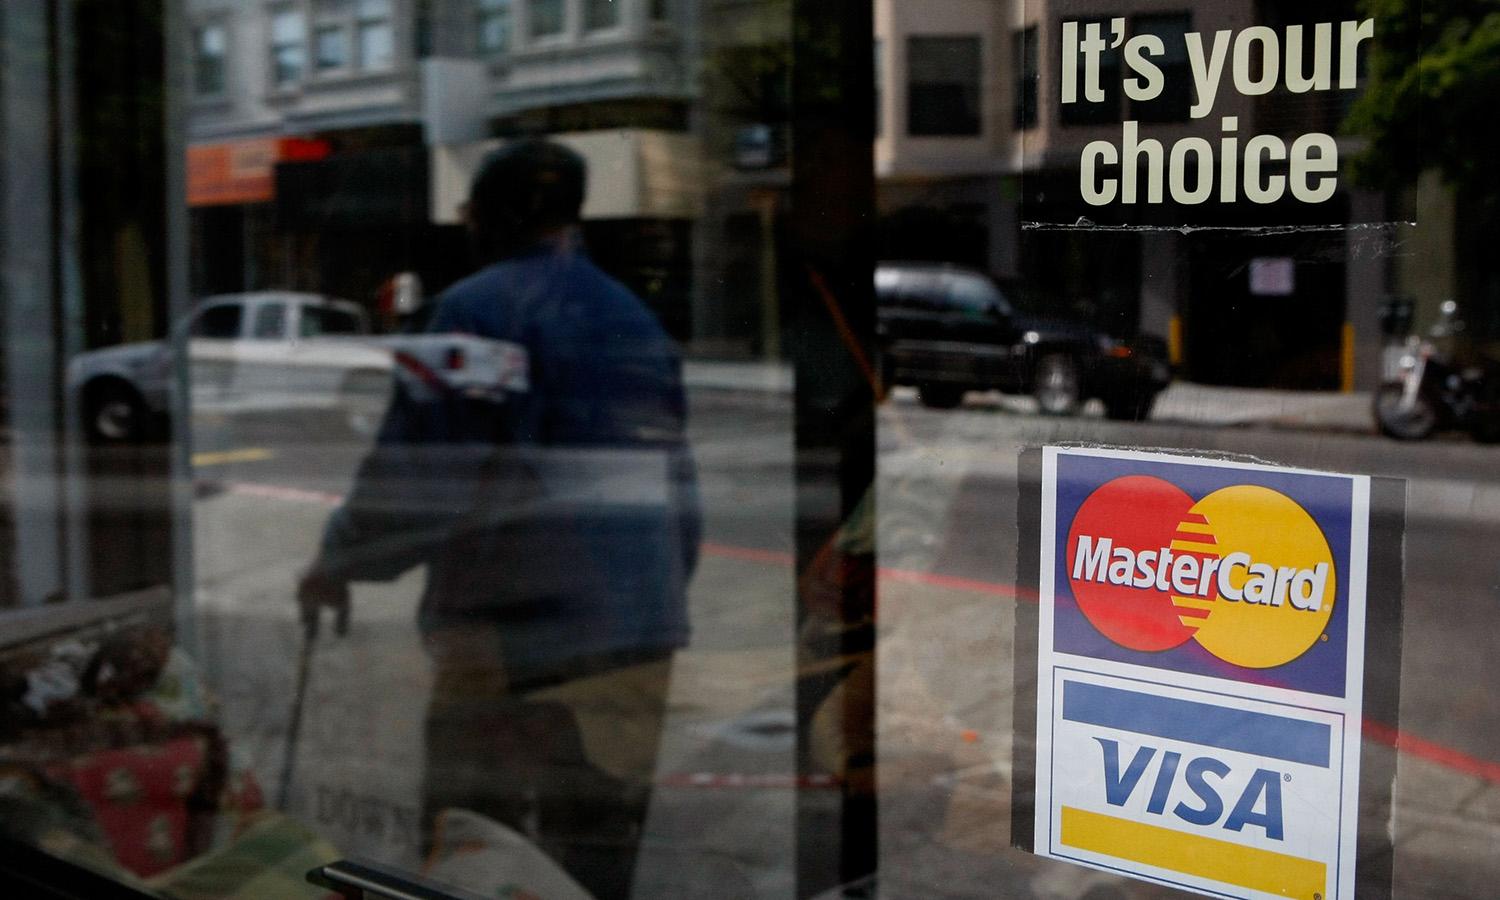 A window sticker advertising Visa and MasterCard payments hangs in a window Feb. 25, 2008, in San Francisco. (Photo by Justin Sullivan/Getty Images)